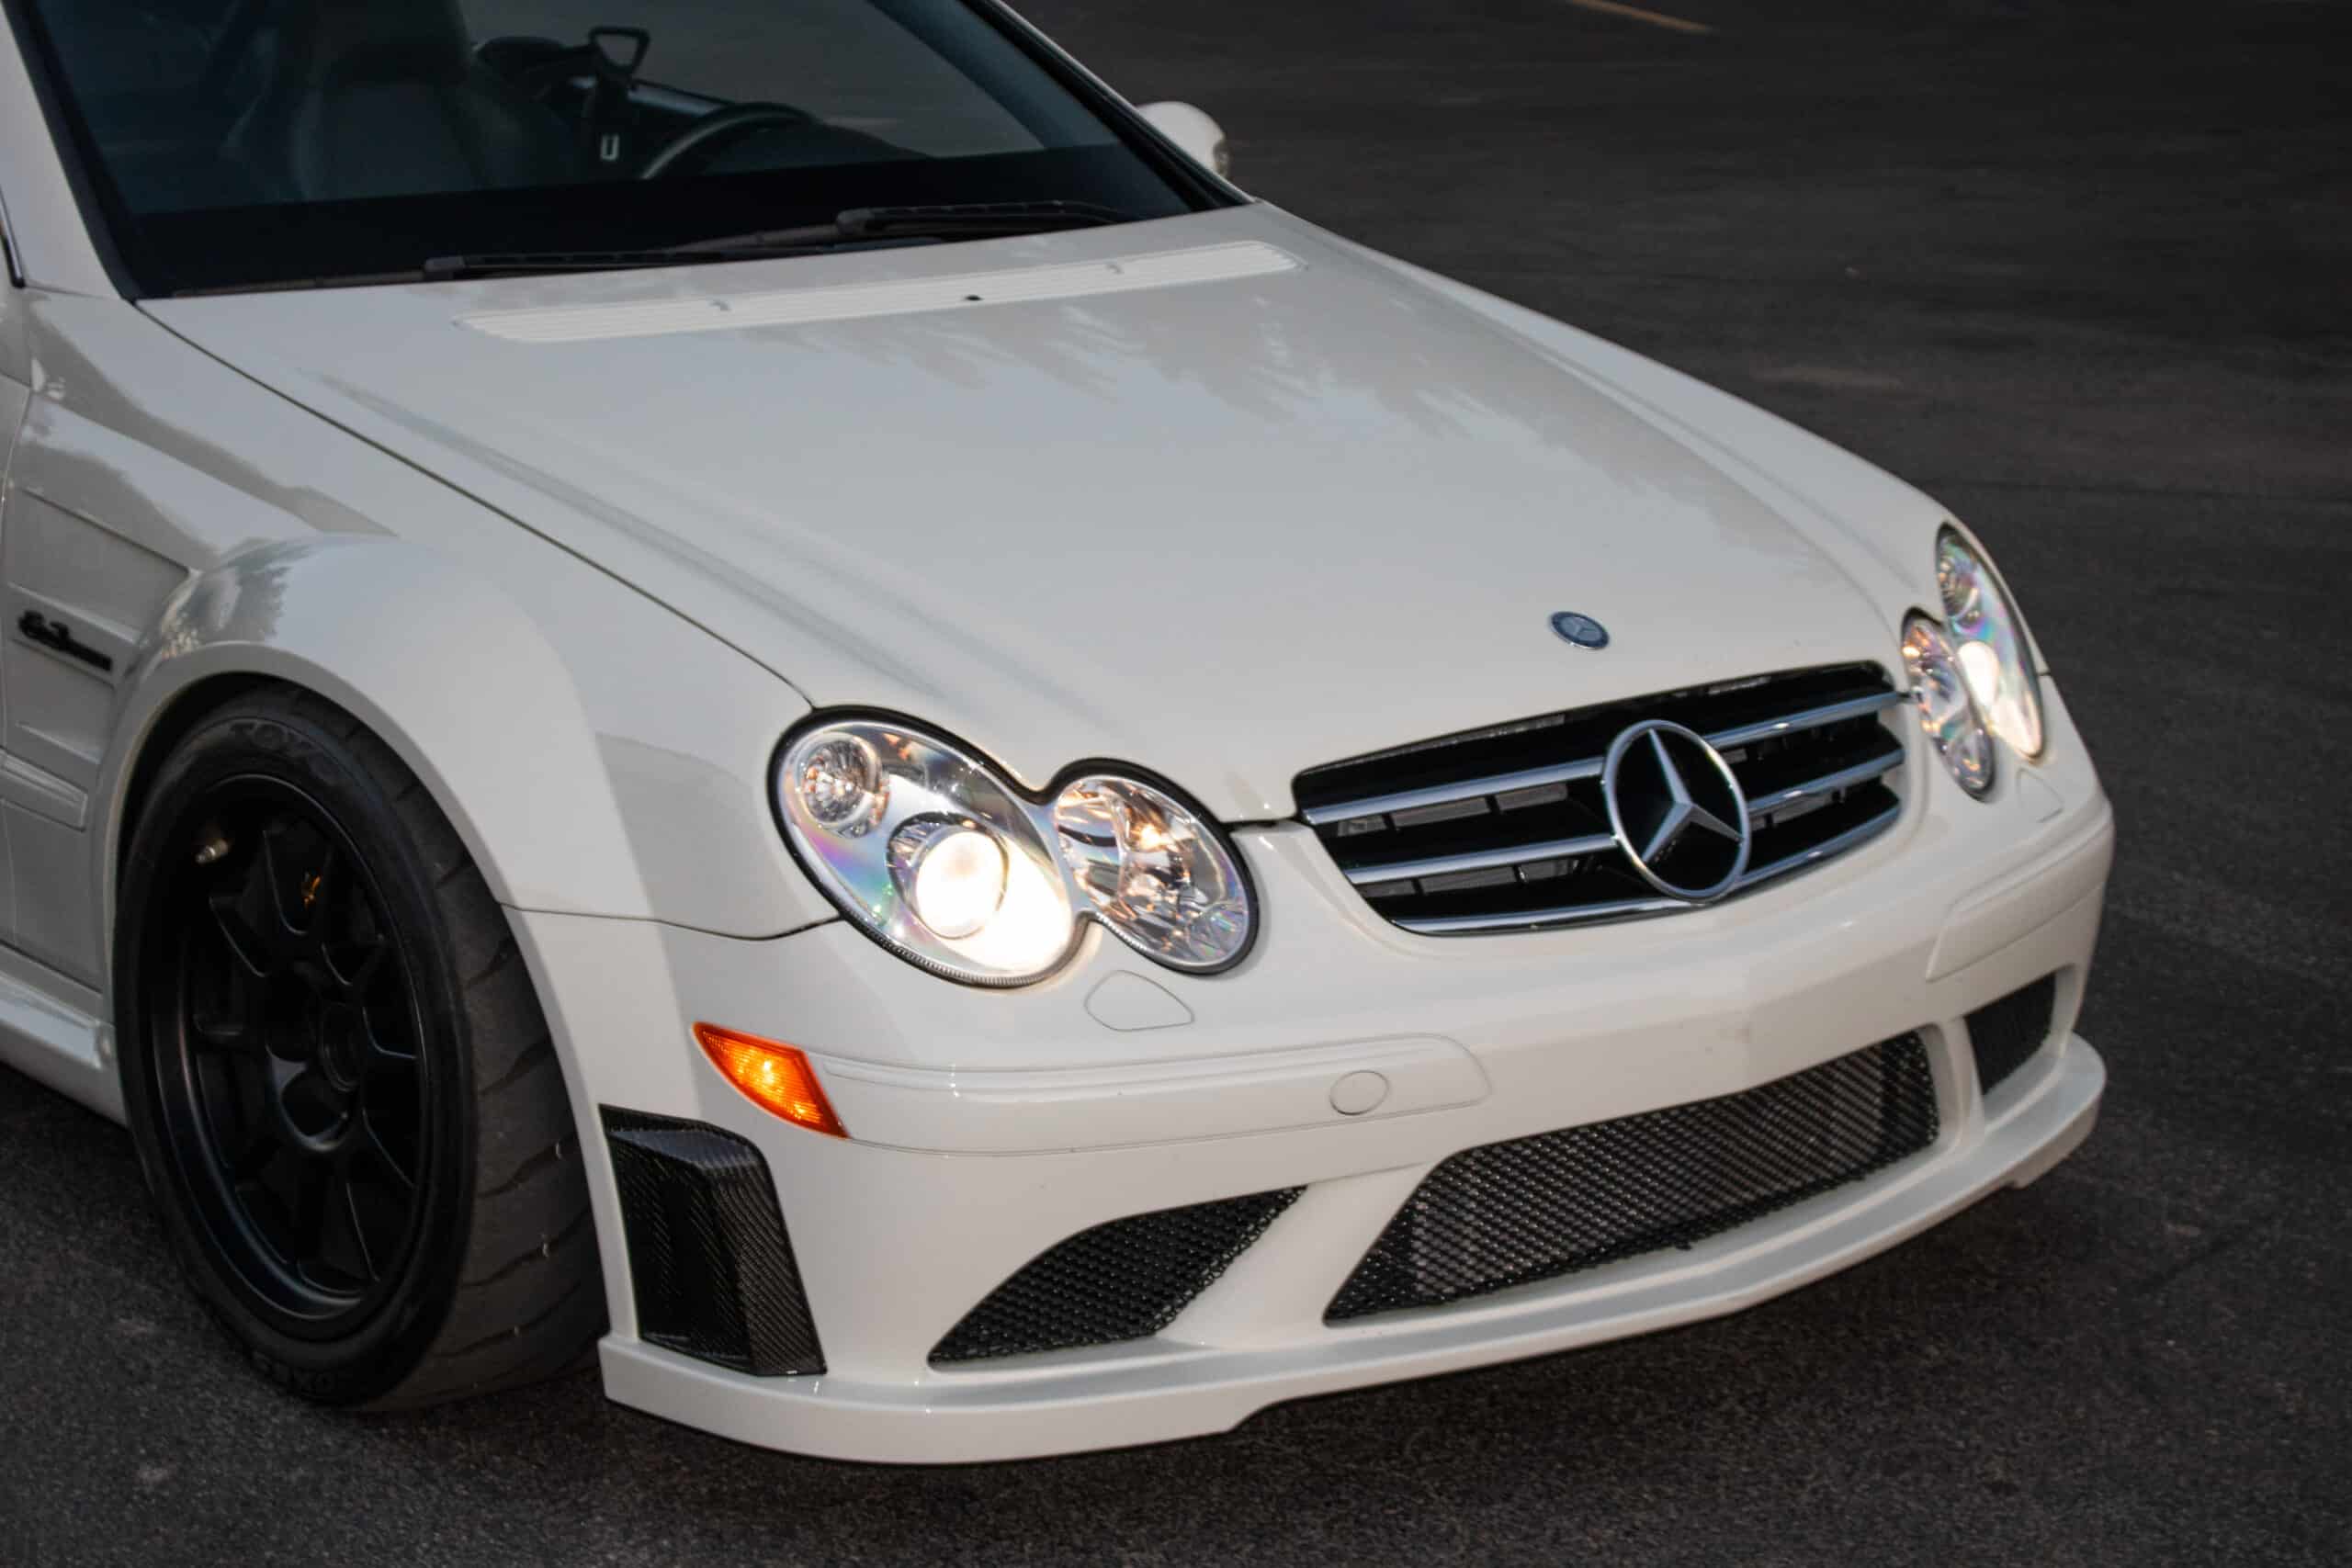 2008 Mercedes Benz CLK63 AMG Black Series by Weistec | 1 of 40 in Arctic White | 800 HP | Supercharged | Only 24K Miles | Fully Documented | Over $65K in Receipts